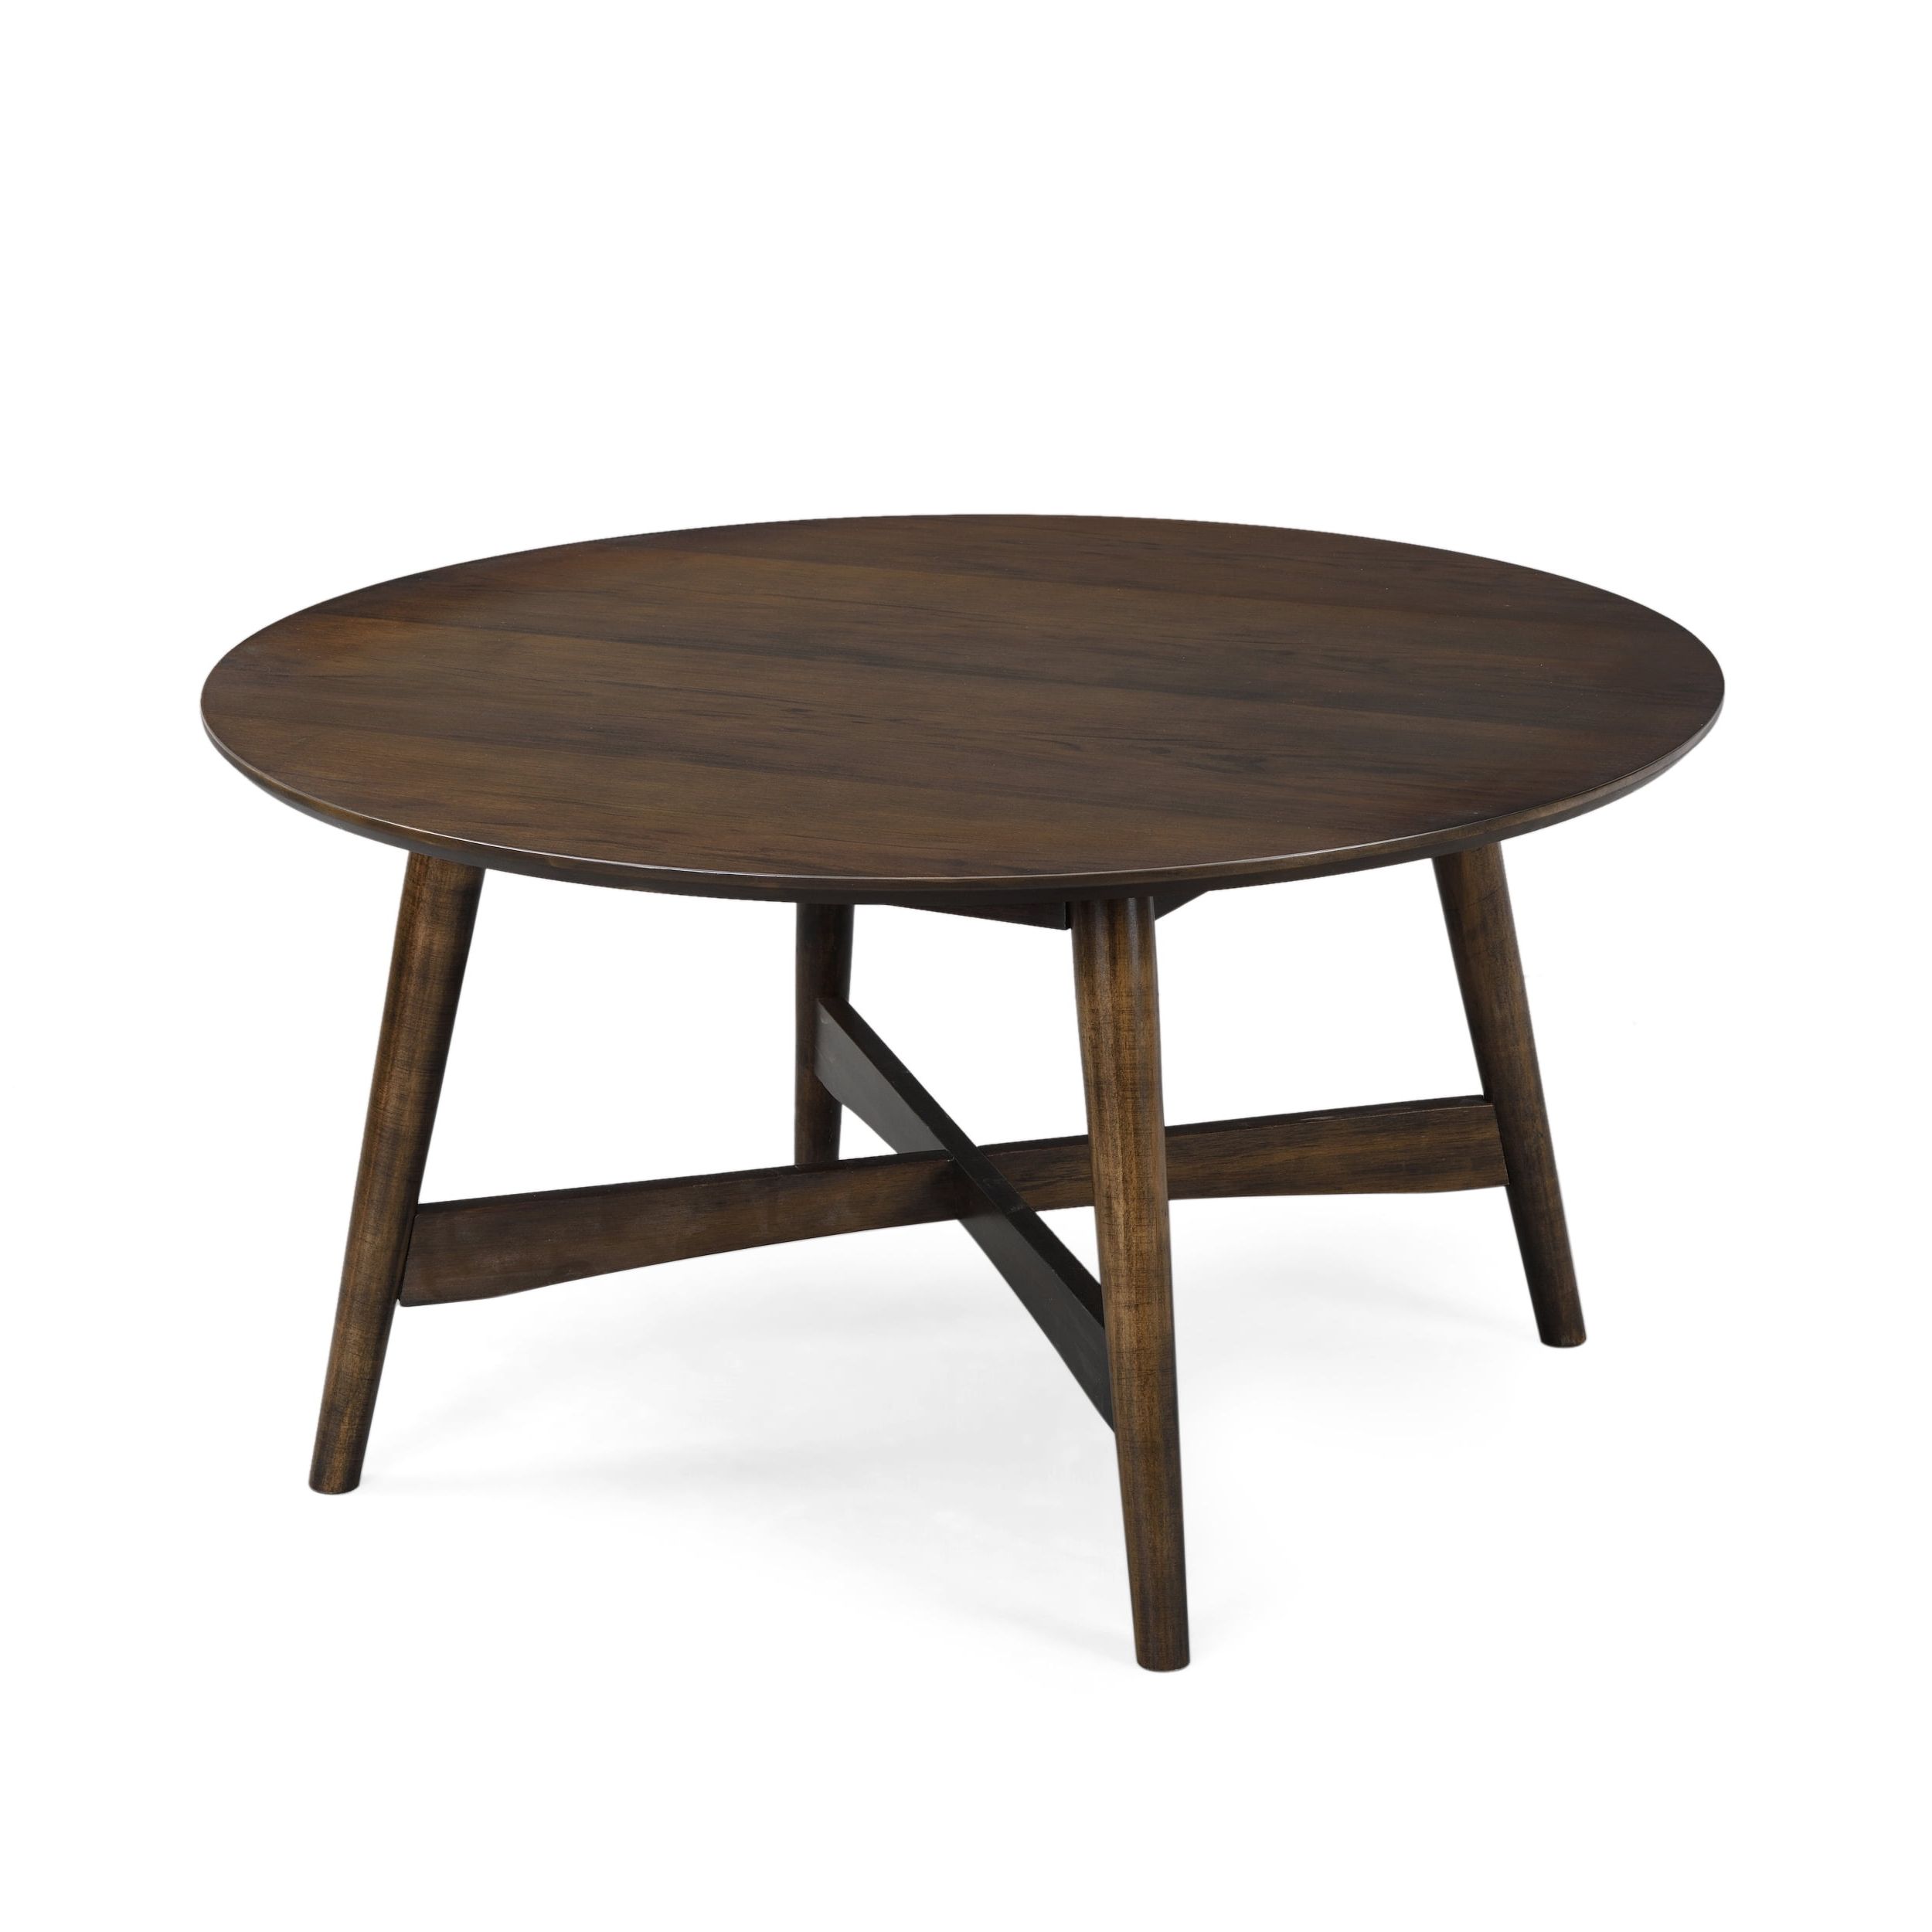 Wooden Mid Century Coffee Tables With Regard To Favorite Murdock Mid Century Modern Wood Coffee Table, Gray – Walmart (View 14 of 15)